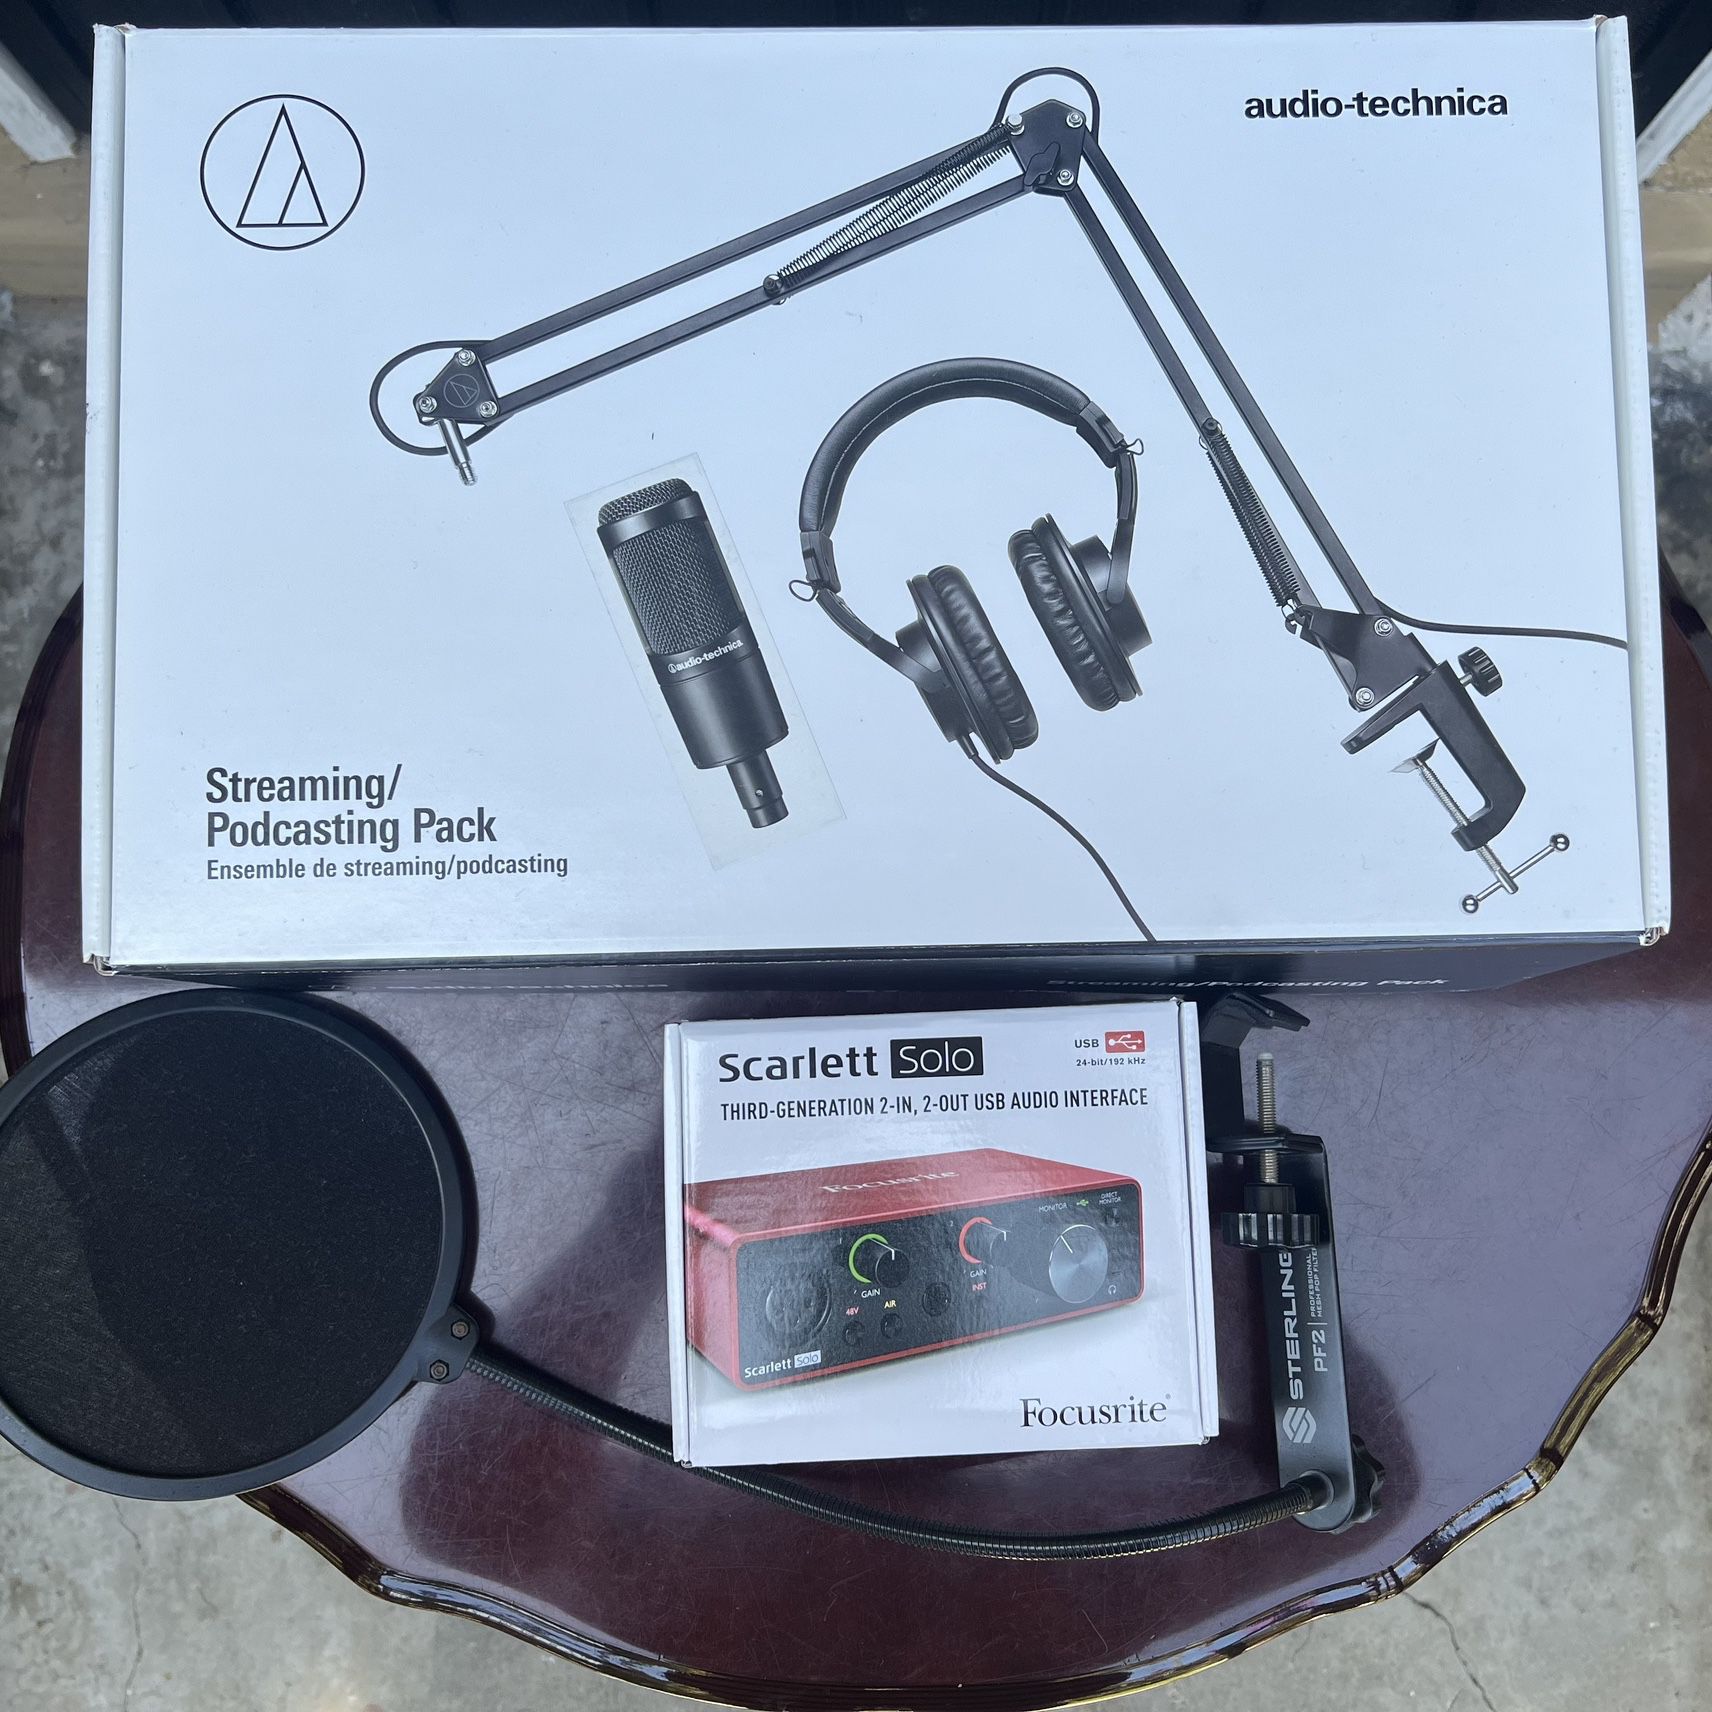 in　Sale　Gen)　Vocal　OfferUp　(3rd　with　Interface　Carson,　USB　for　Scarlett　Microphone　Audio-Technica　Focusrite　Black　Pack,　AT2035PK　CA　Solo　Audio